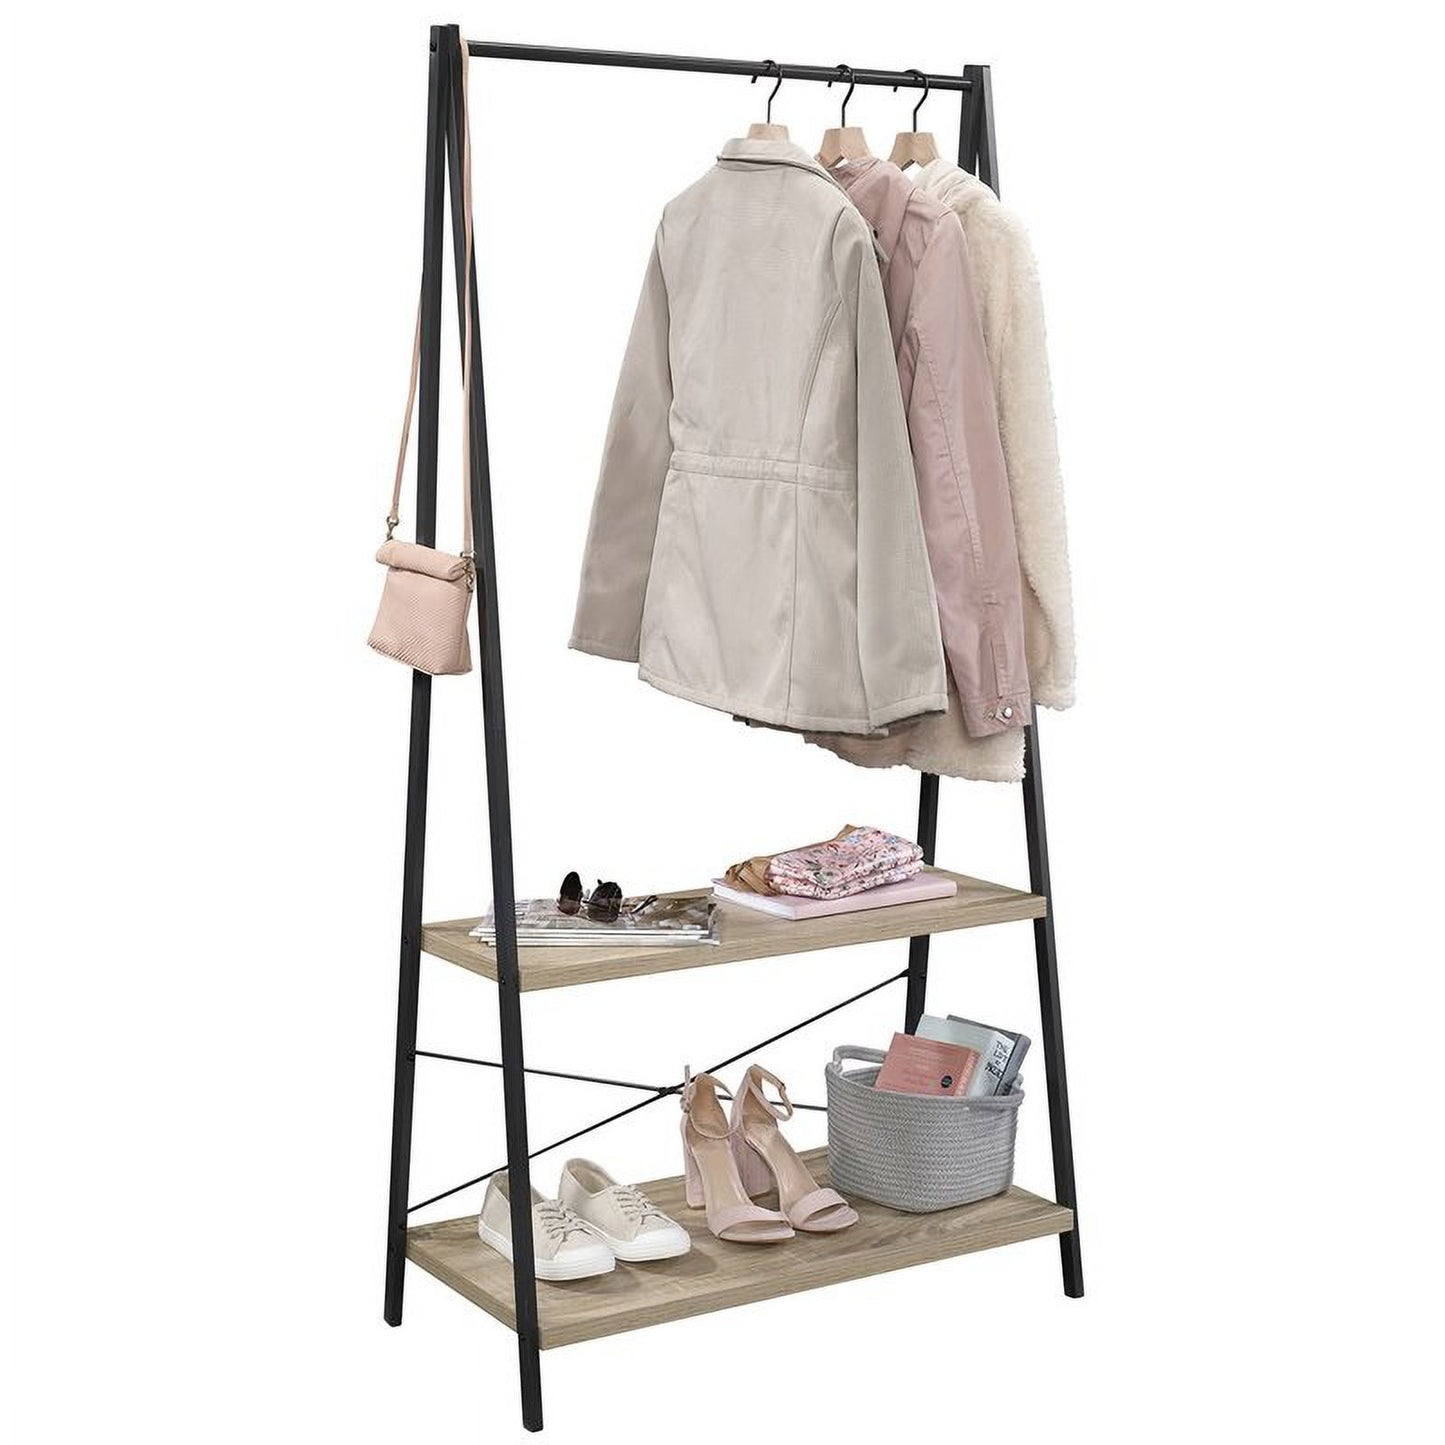 North Avenue Wardrobe Hanging Rack With Two Shelves Charter Oak Finish